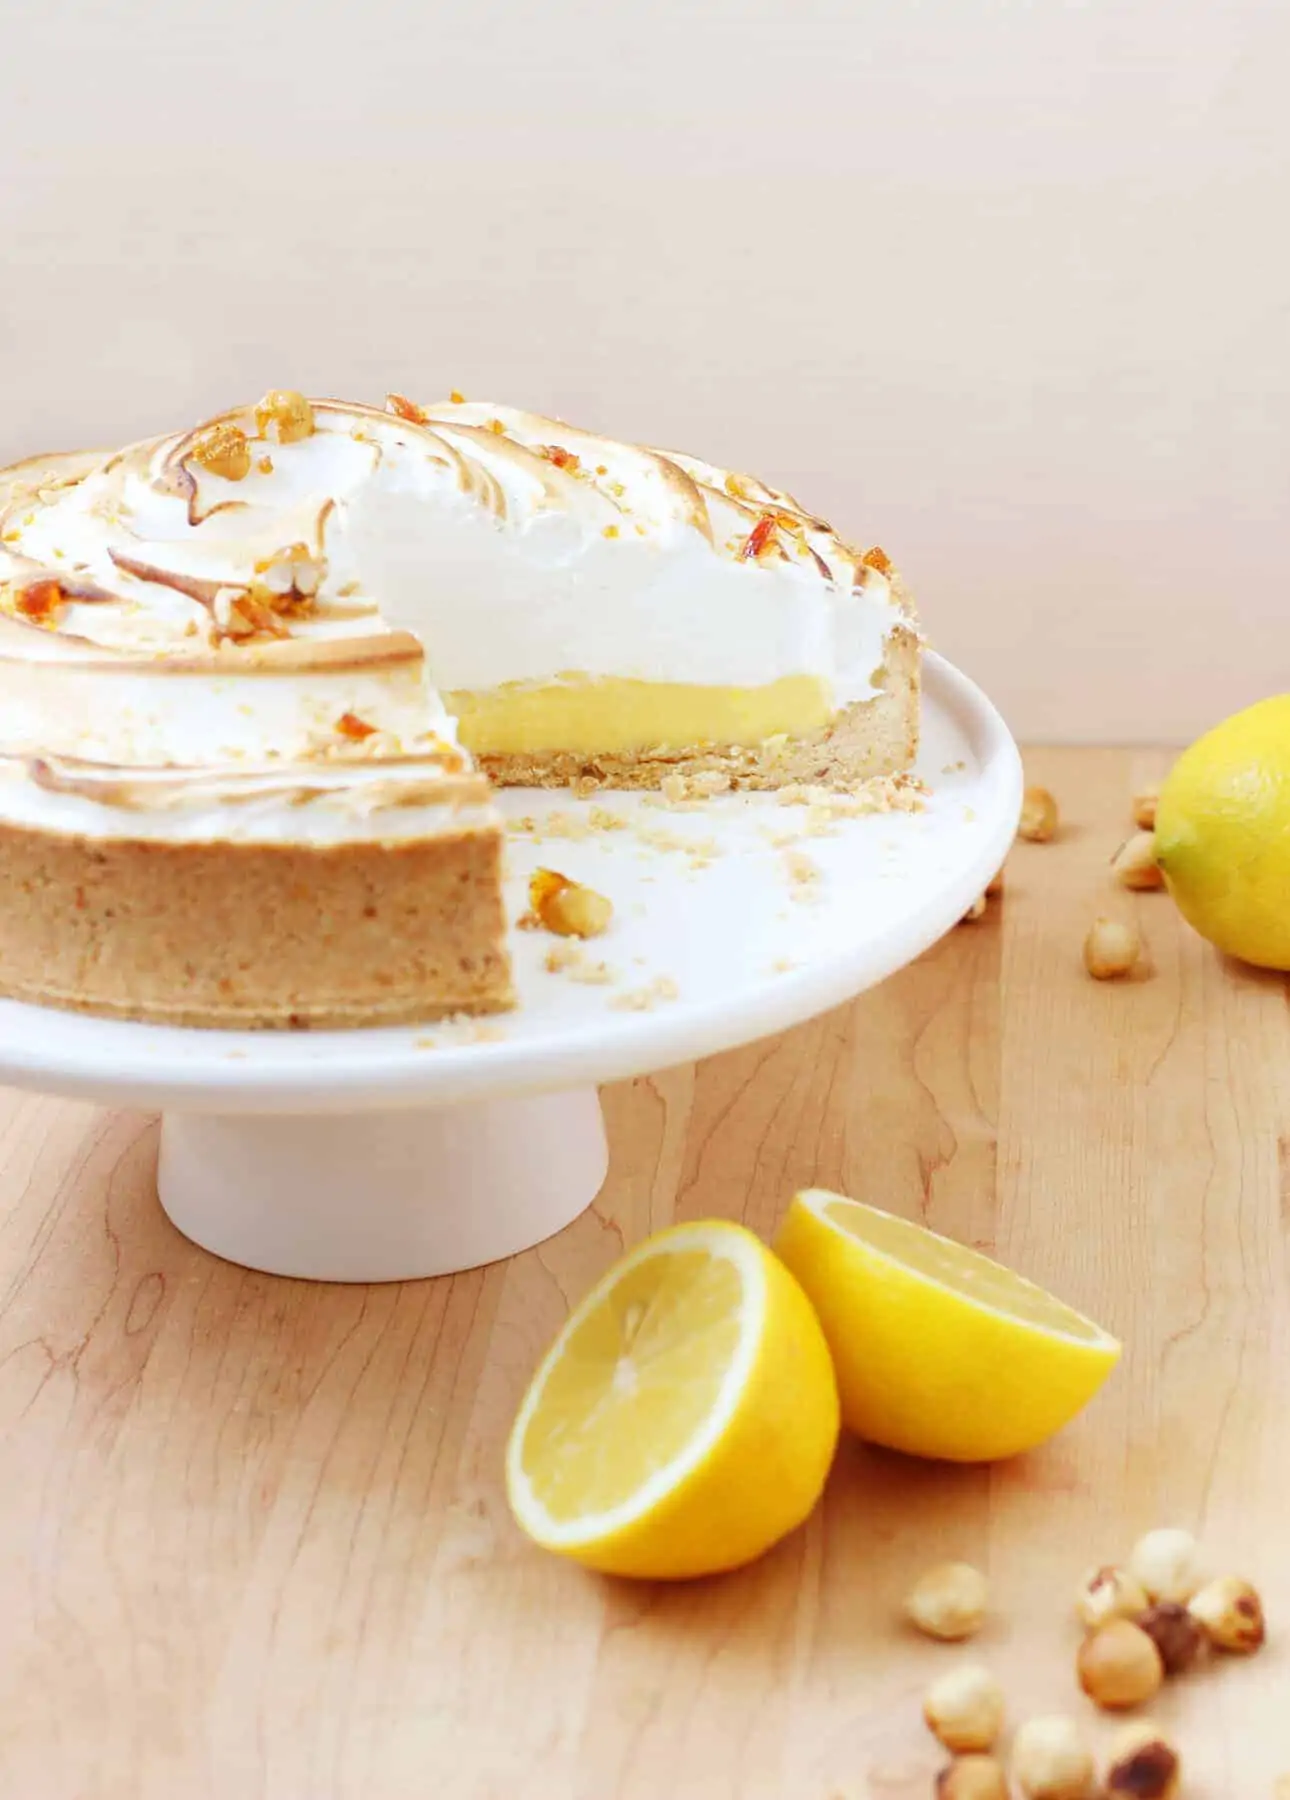 How to Make a Perfect Lemon Meringue Pie: This Lemon Meringue Pie recipe will create a truly memorable dessert: the easy, cookie-like hazelnut crust combined with the zesty filling and creamy Italian meringue will delight all fans of this classic dessert. Helpful tips and how-to video included! // FoodNouveau.com